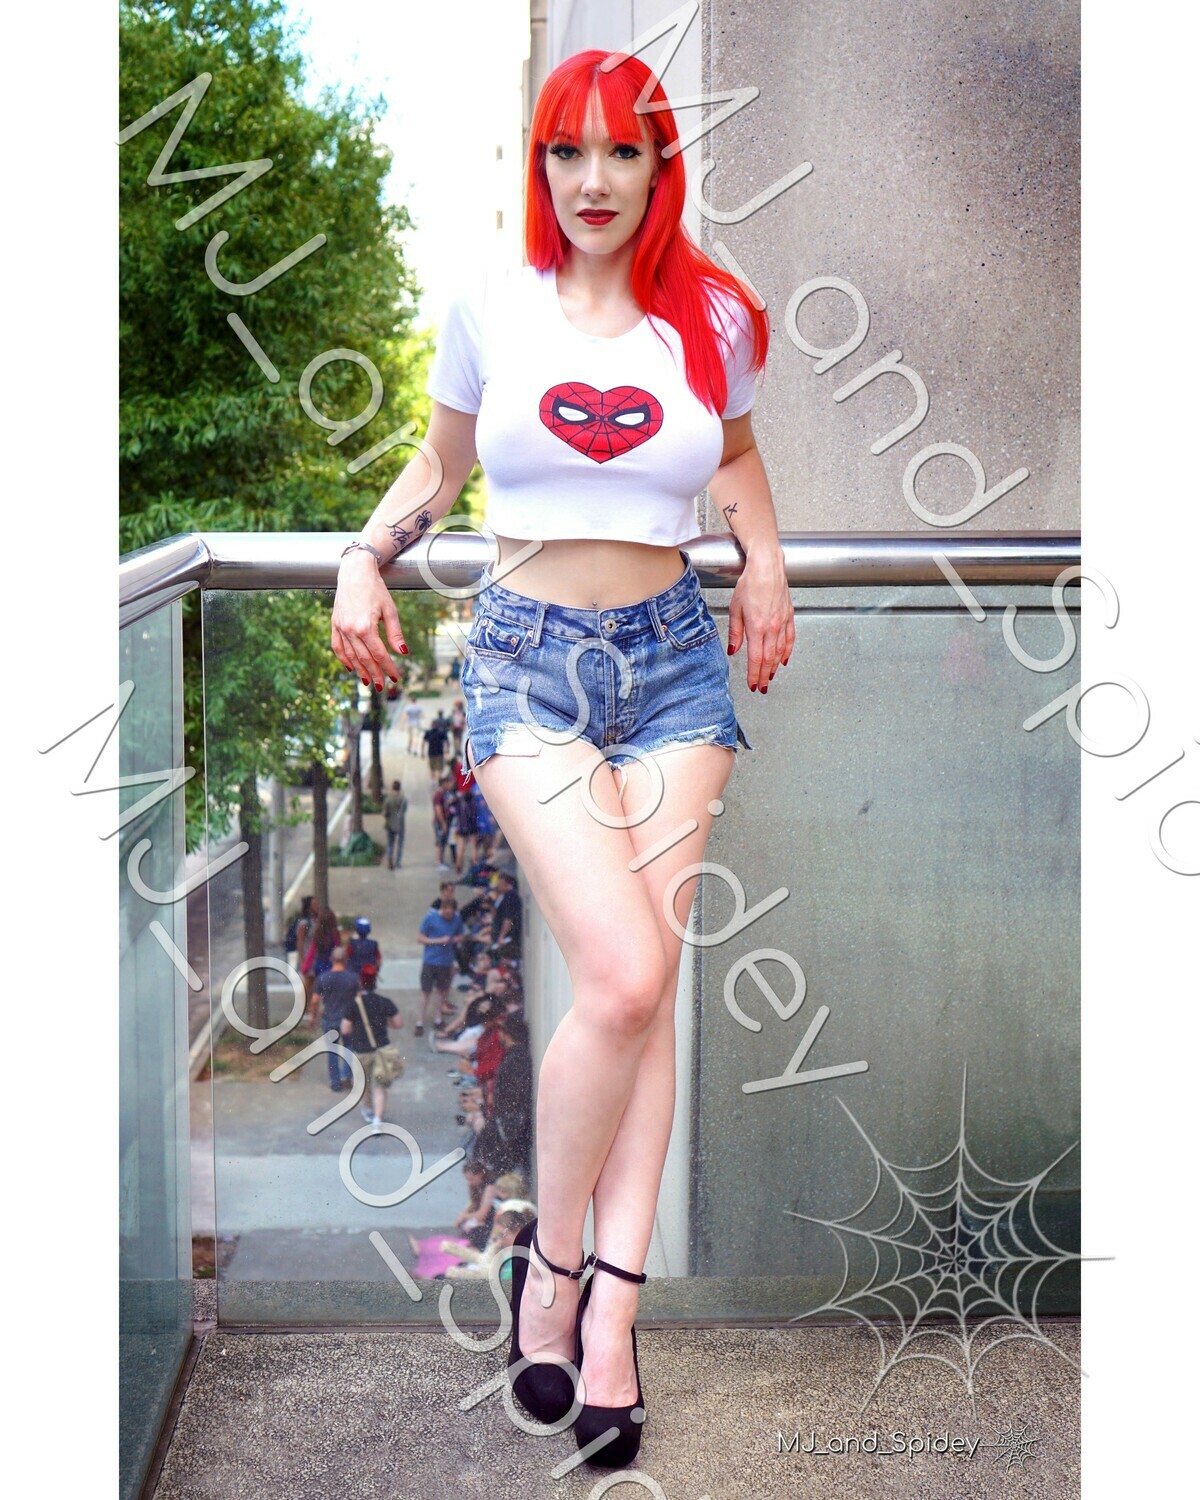 Marvel - Spider-Man - Mary Jane Watson - Classic 5 -  Cosplay Print (@MJ_and_Spidey, MJ and Spidey, Comics)